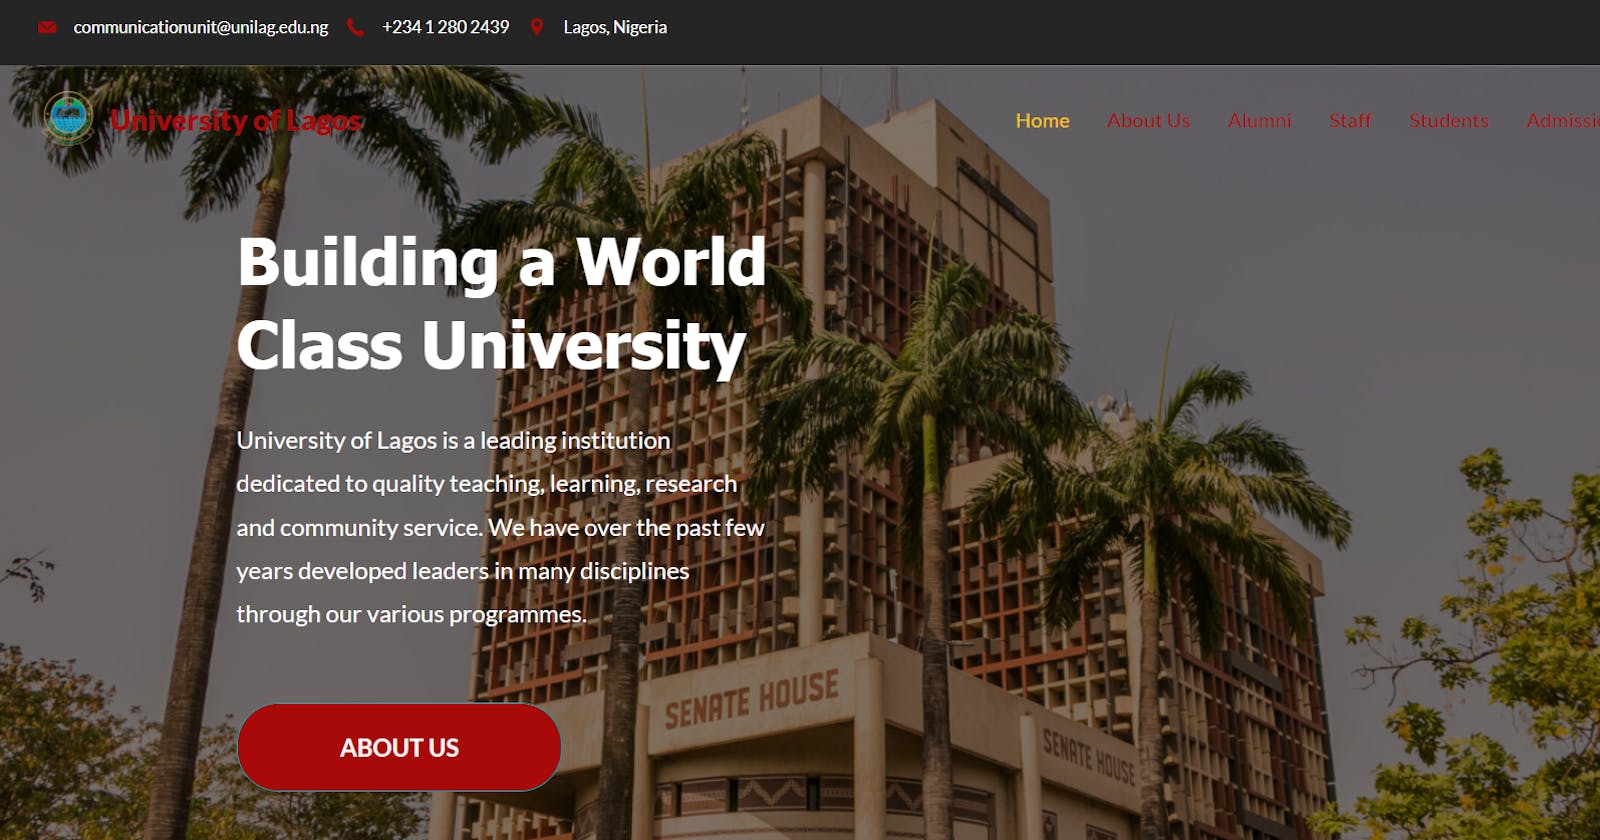 University of Lagos Website Redesign with WordPress and  Elementor Theme Builder